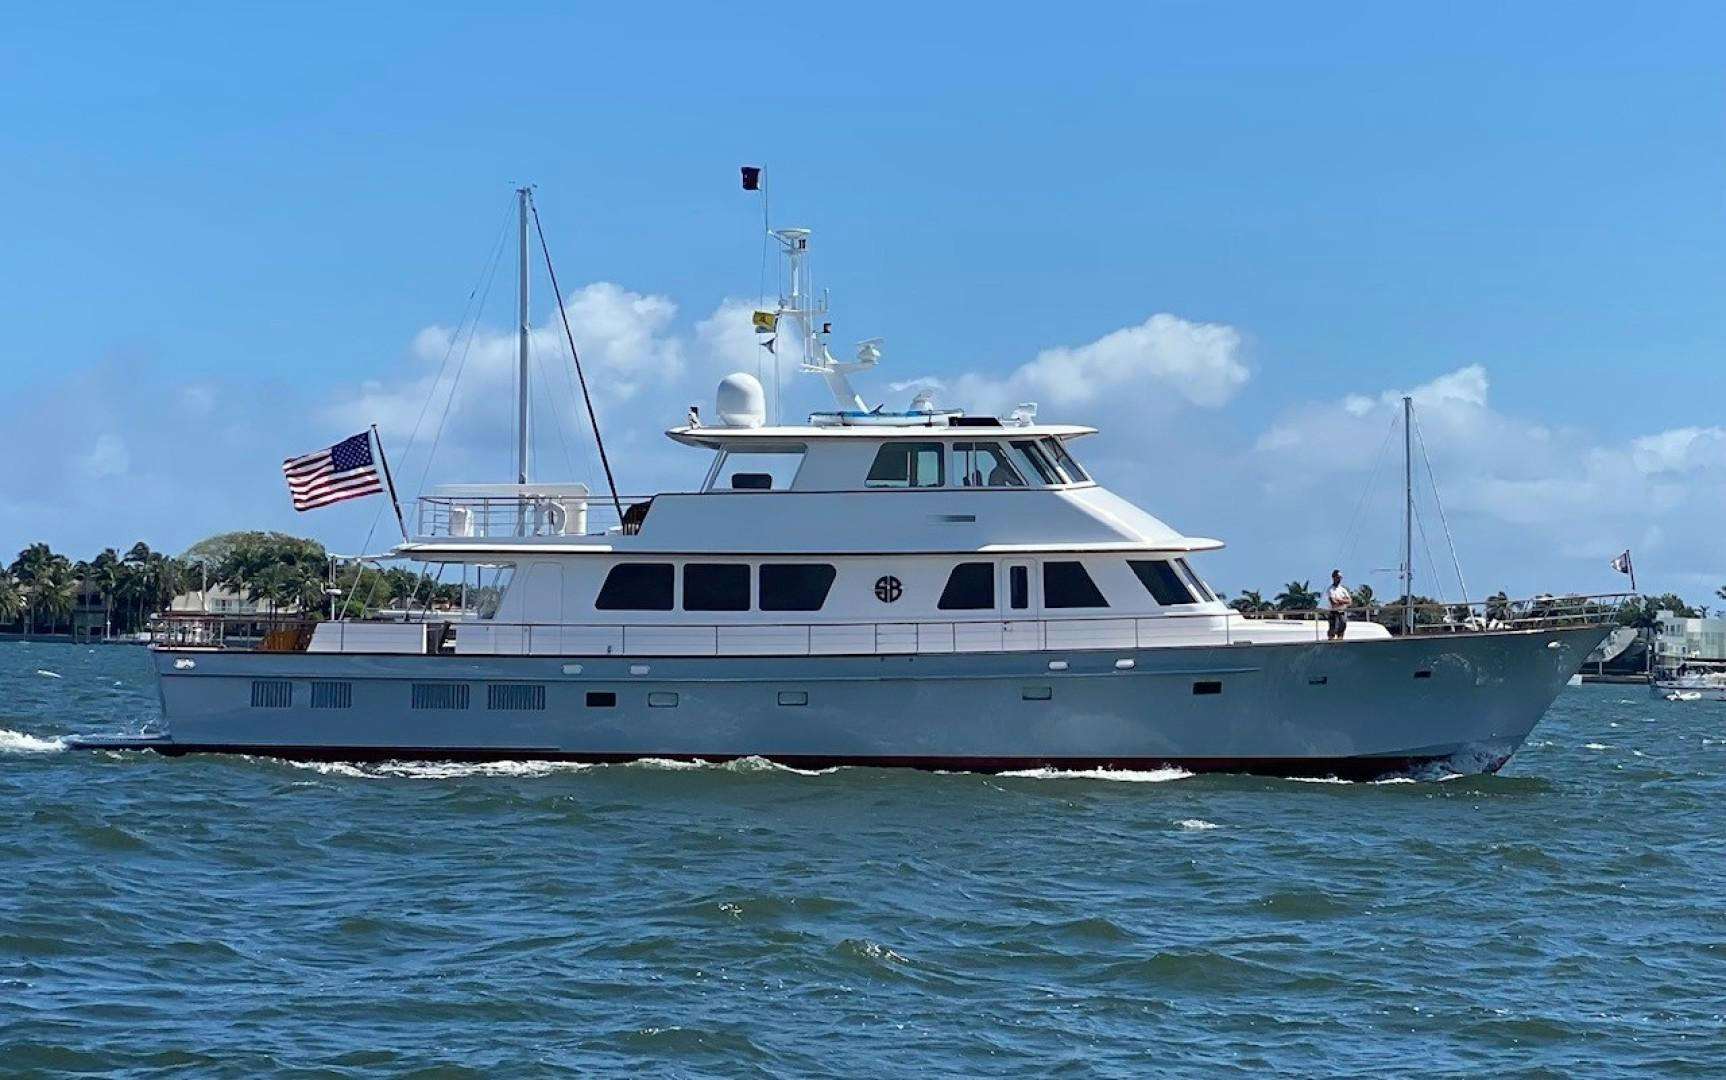 SEA BOLD Yacht for Sale in Fort Lauderdale, 96' (29.26m) 2003 C. Raymond  Hunt / New England Boatworks